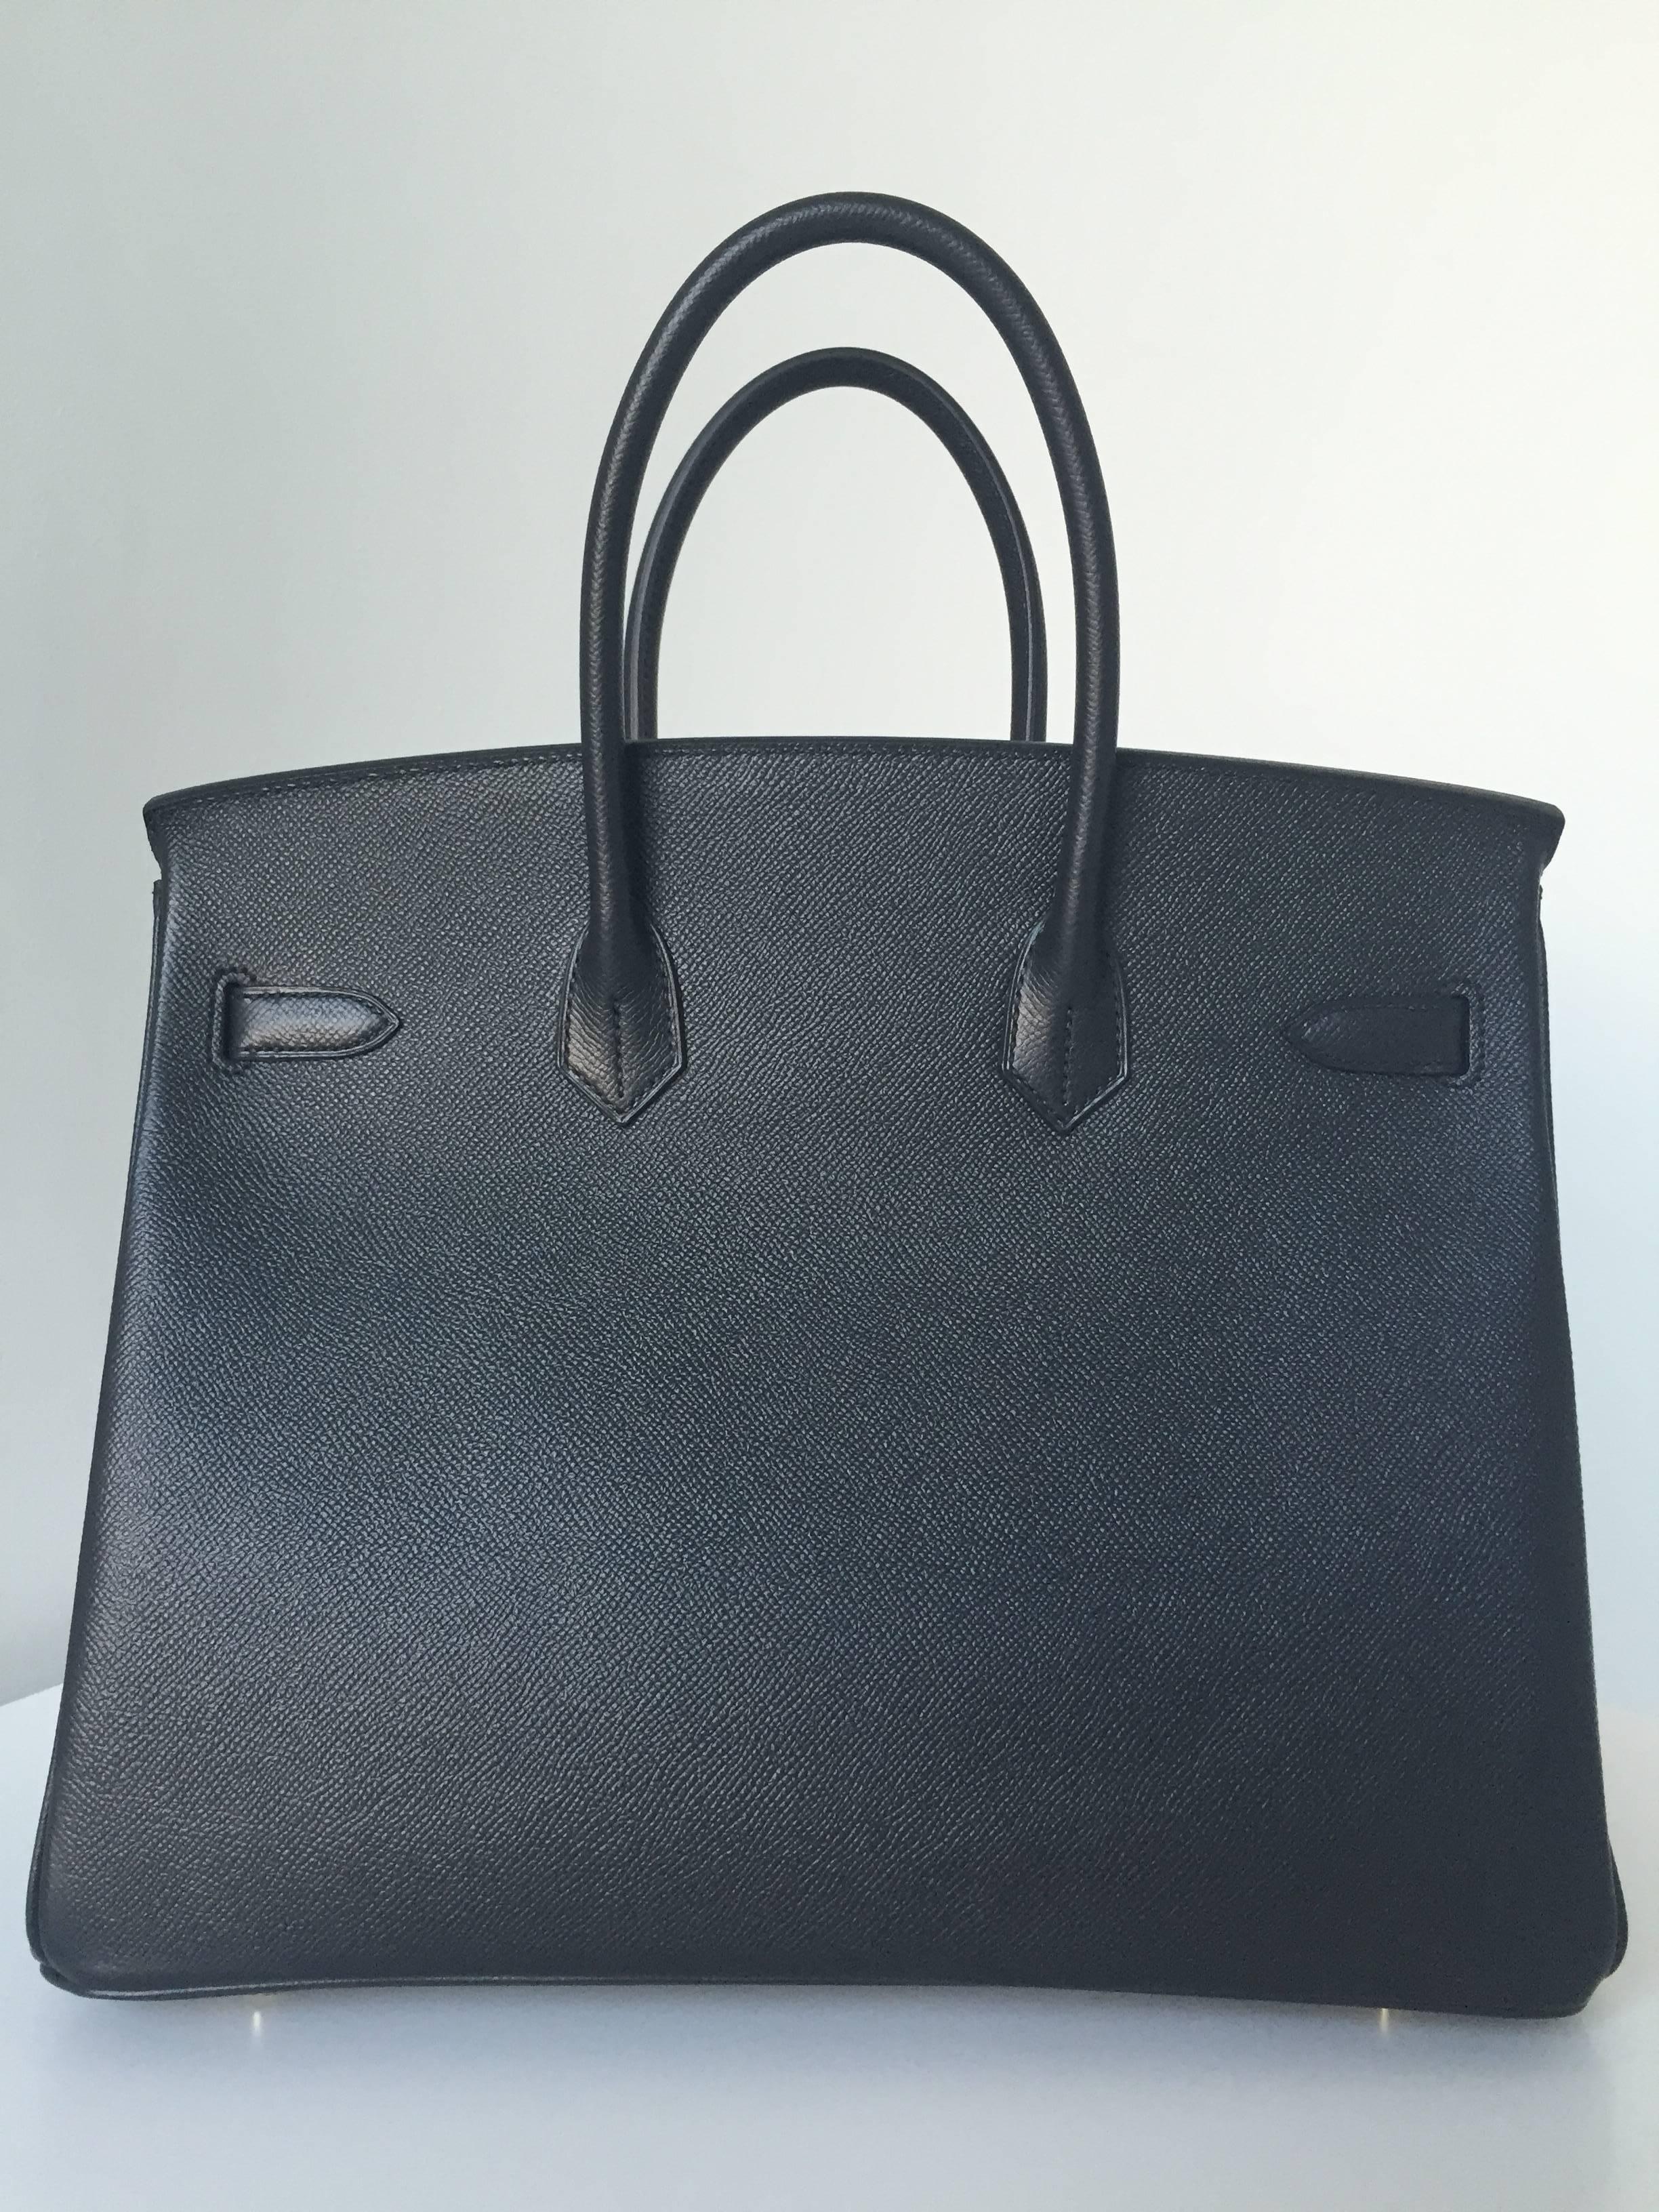 We have this super beauty available, made in black epsom combined with gold hardware its a must in every ladies wardrobe!

This Birkin is made from Epsom which is an embossed leather, lightweight and sturdy that holds it's shape and is scratch